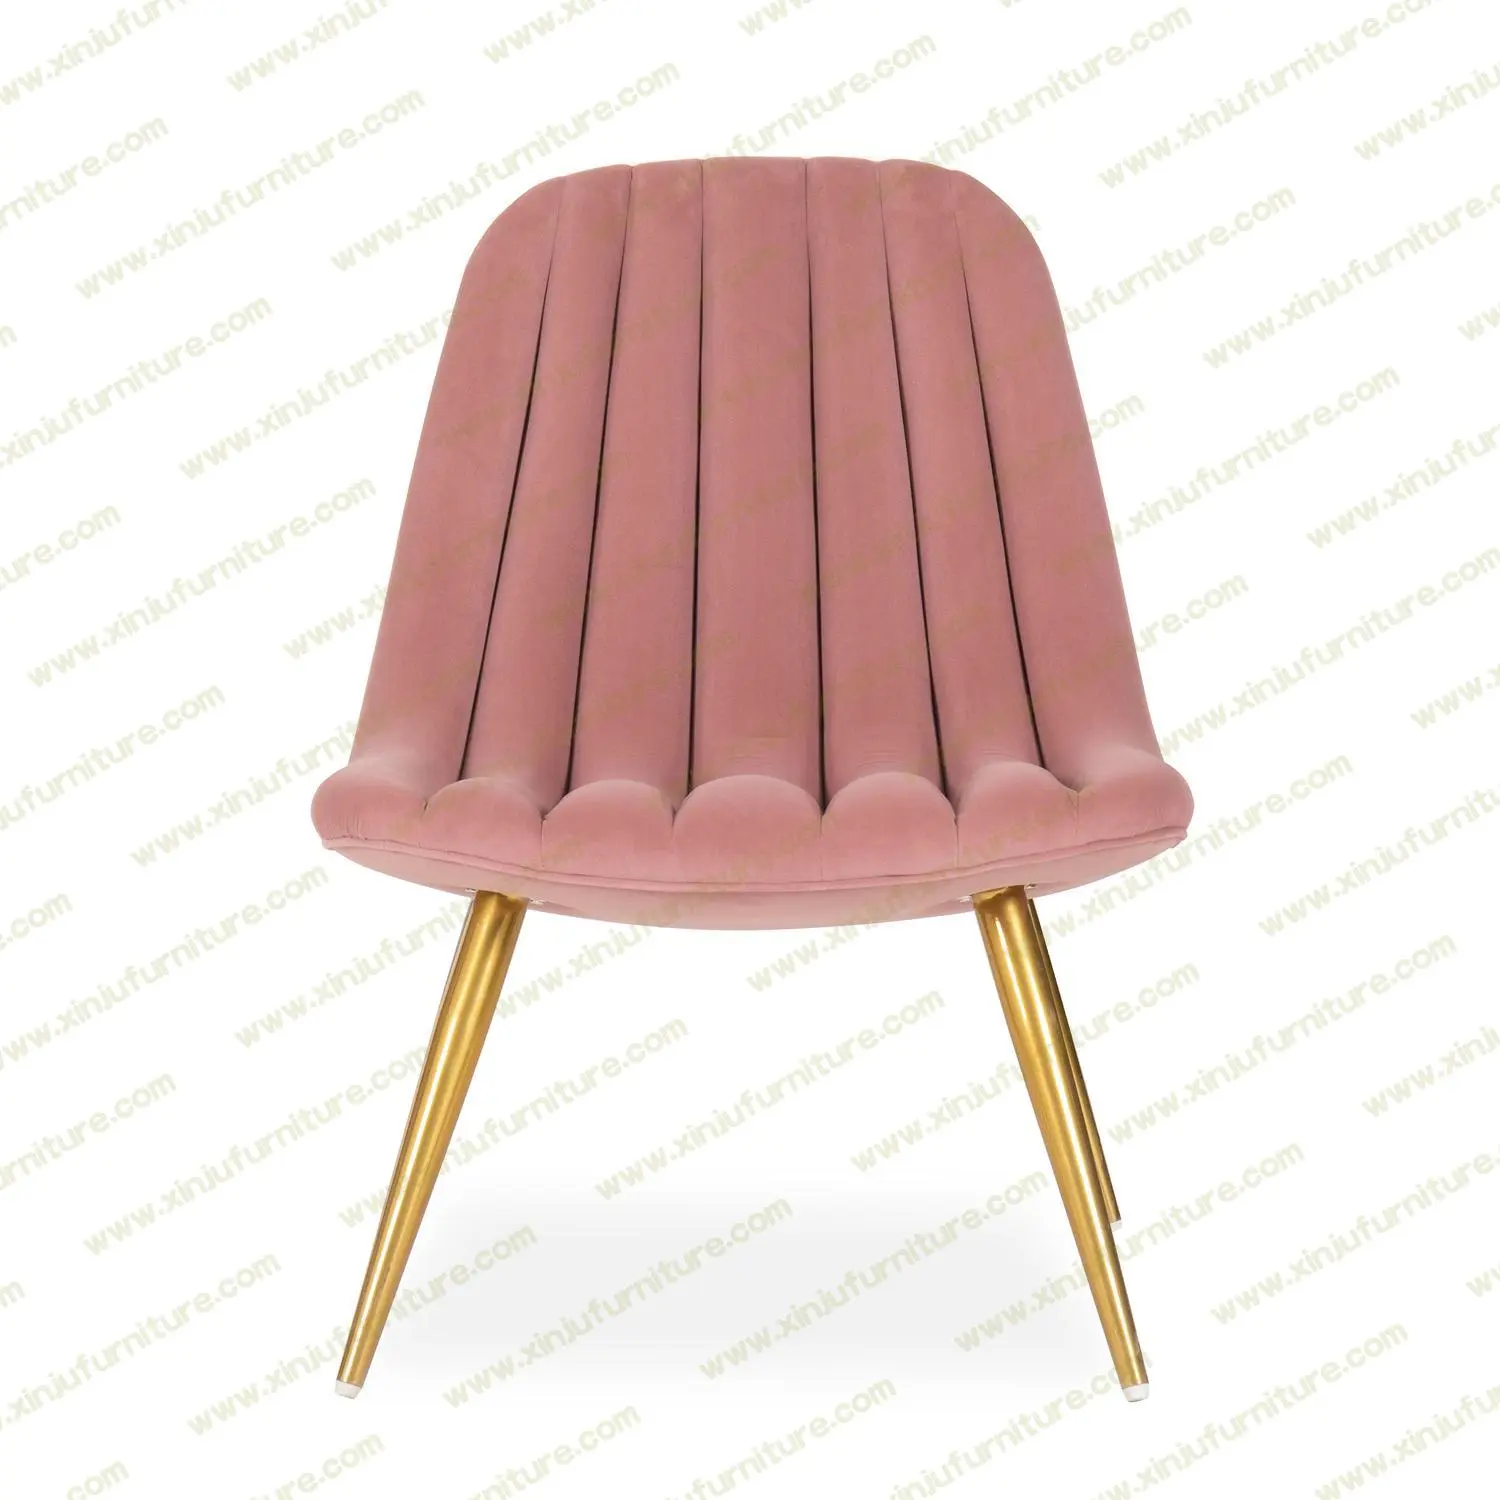 Thickened comfortable pink leisure chair